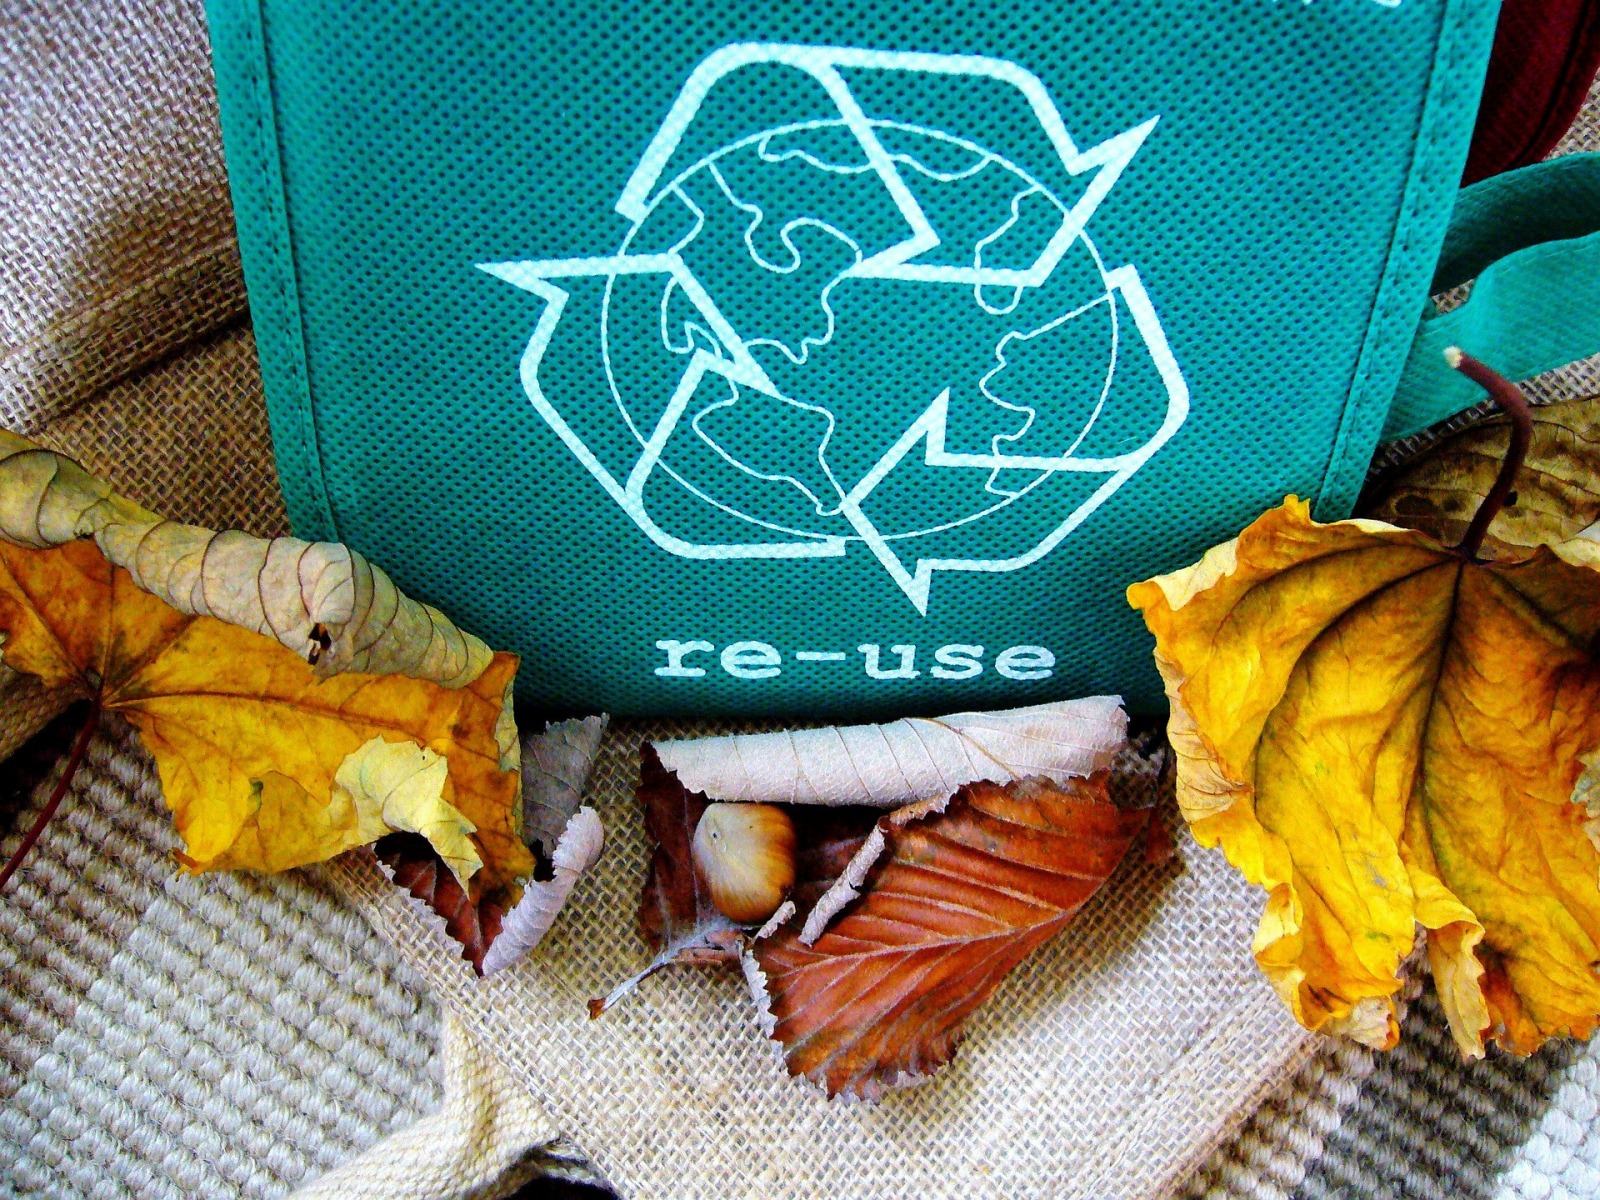 Since resources on the Earth are limited, recycling helps us to reduce the quantities of plastic waste disposal.